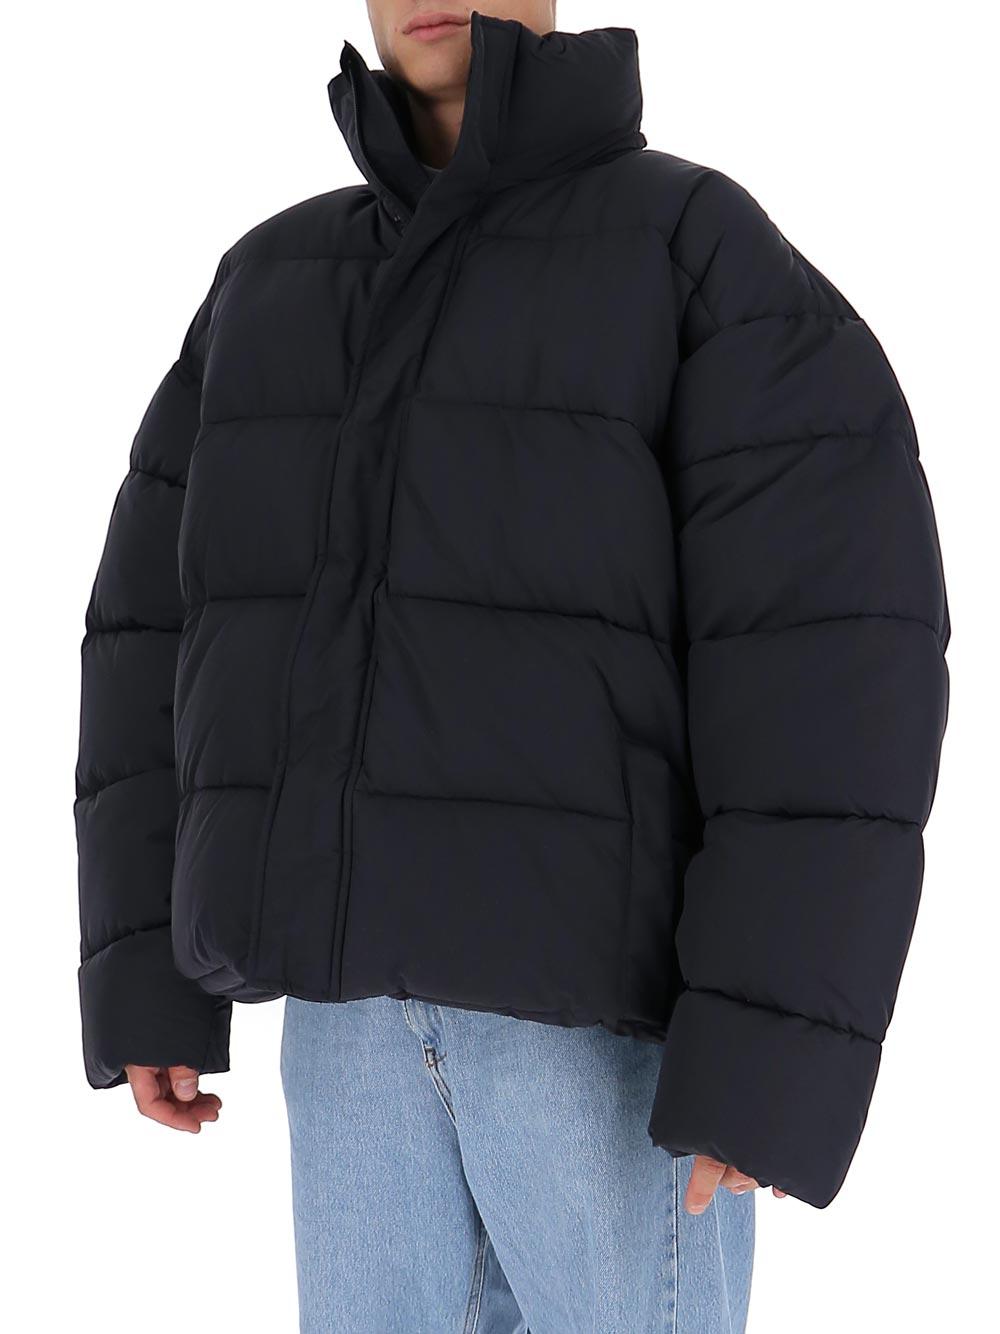 Balenciaga Synthetic Bb Puffer Jacket in Blue for Men - Lyst